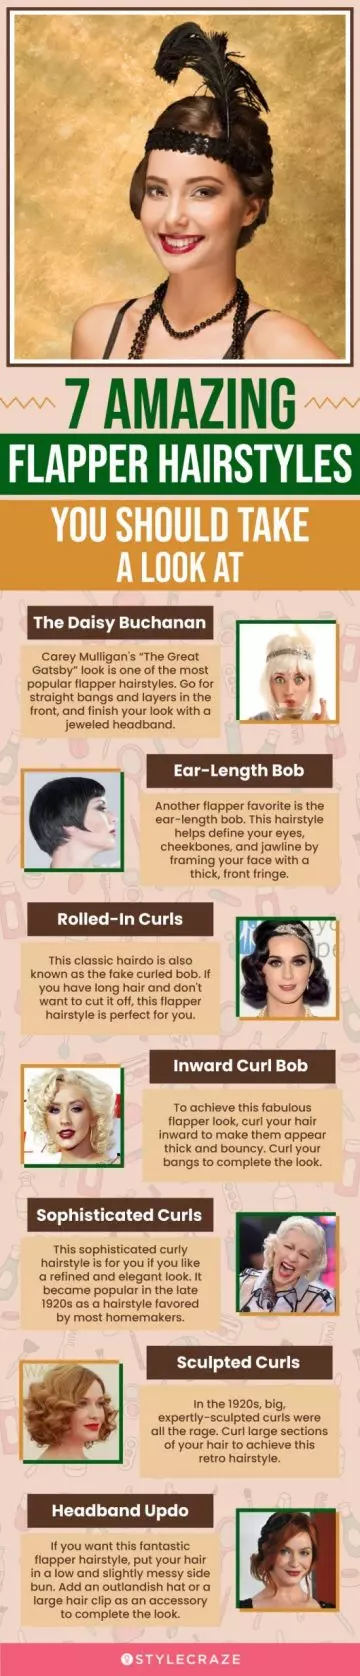 7 amazing flapper hairstyles you should take a look at (infographic)